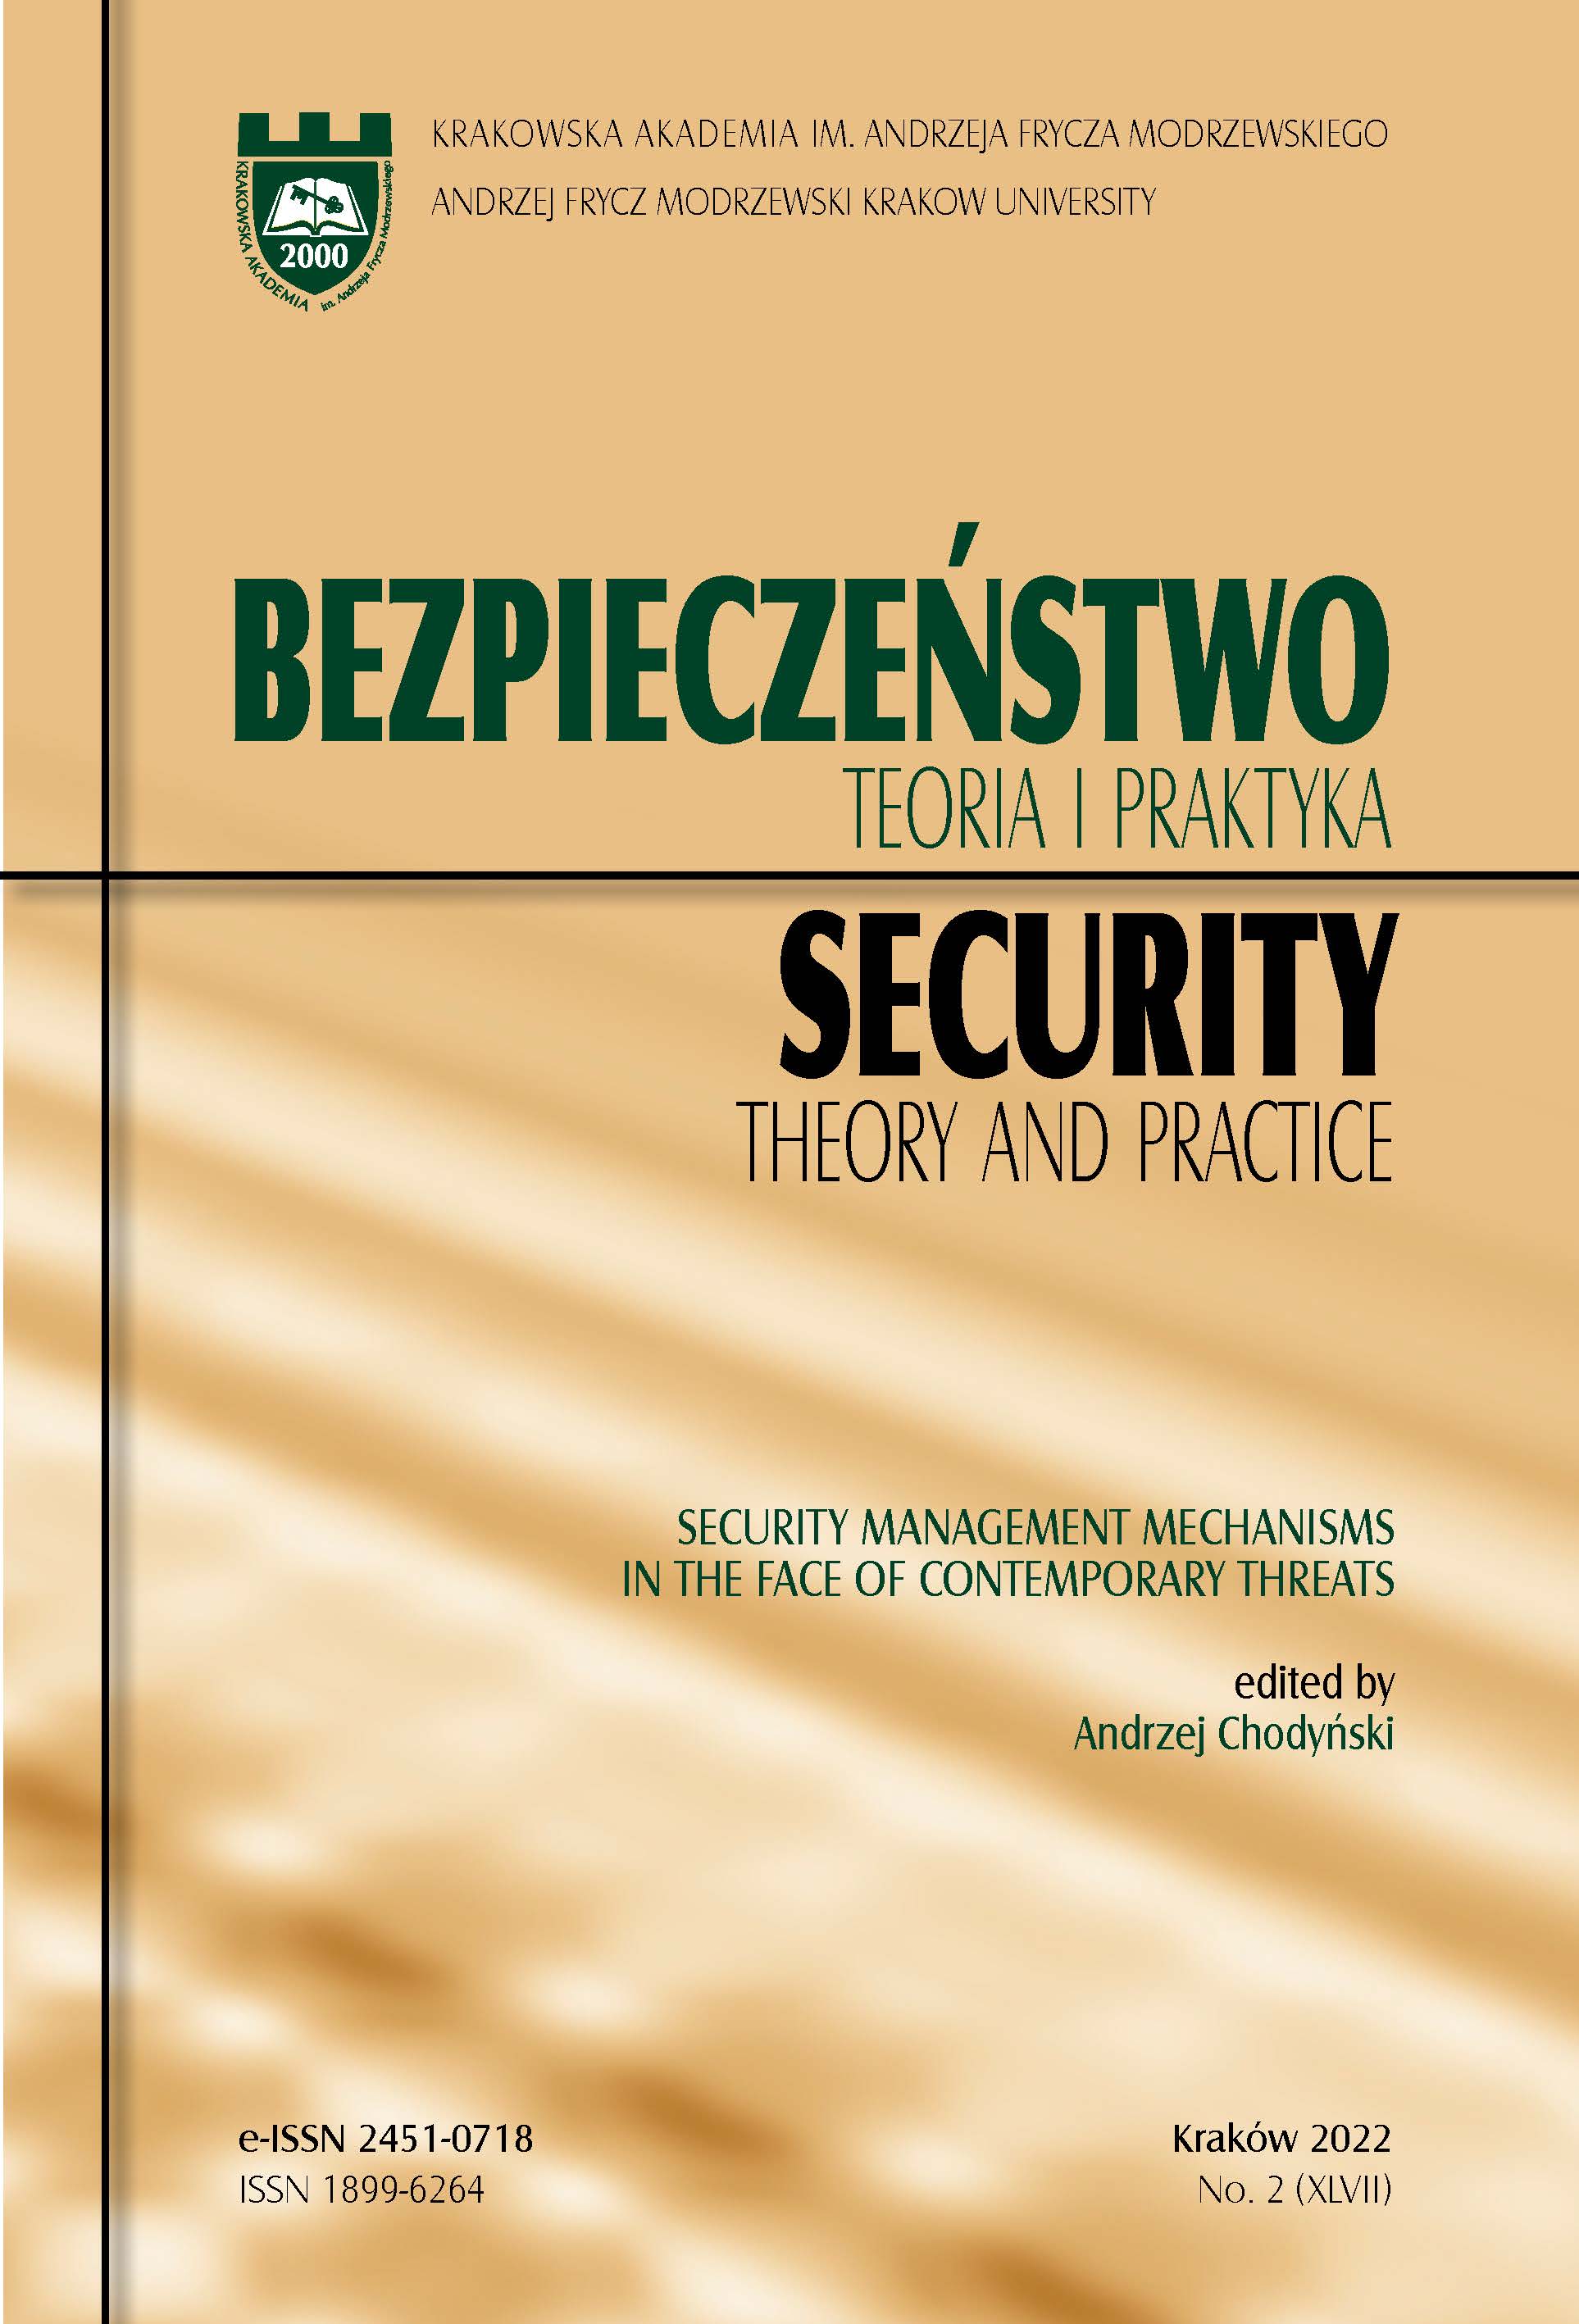 Security management mechanisms in the face of contemporary threats: Introduction